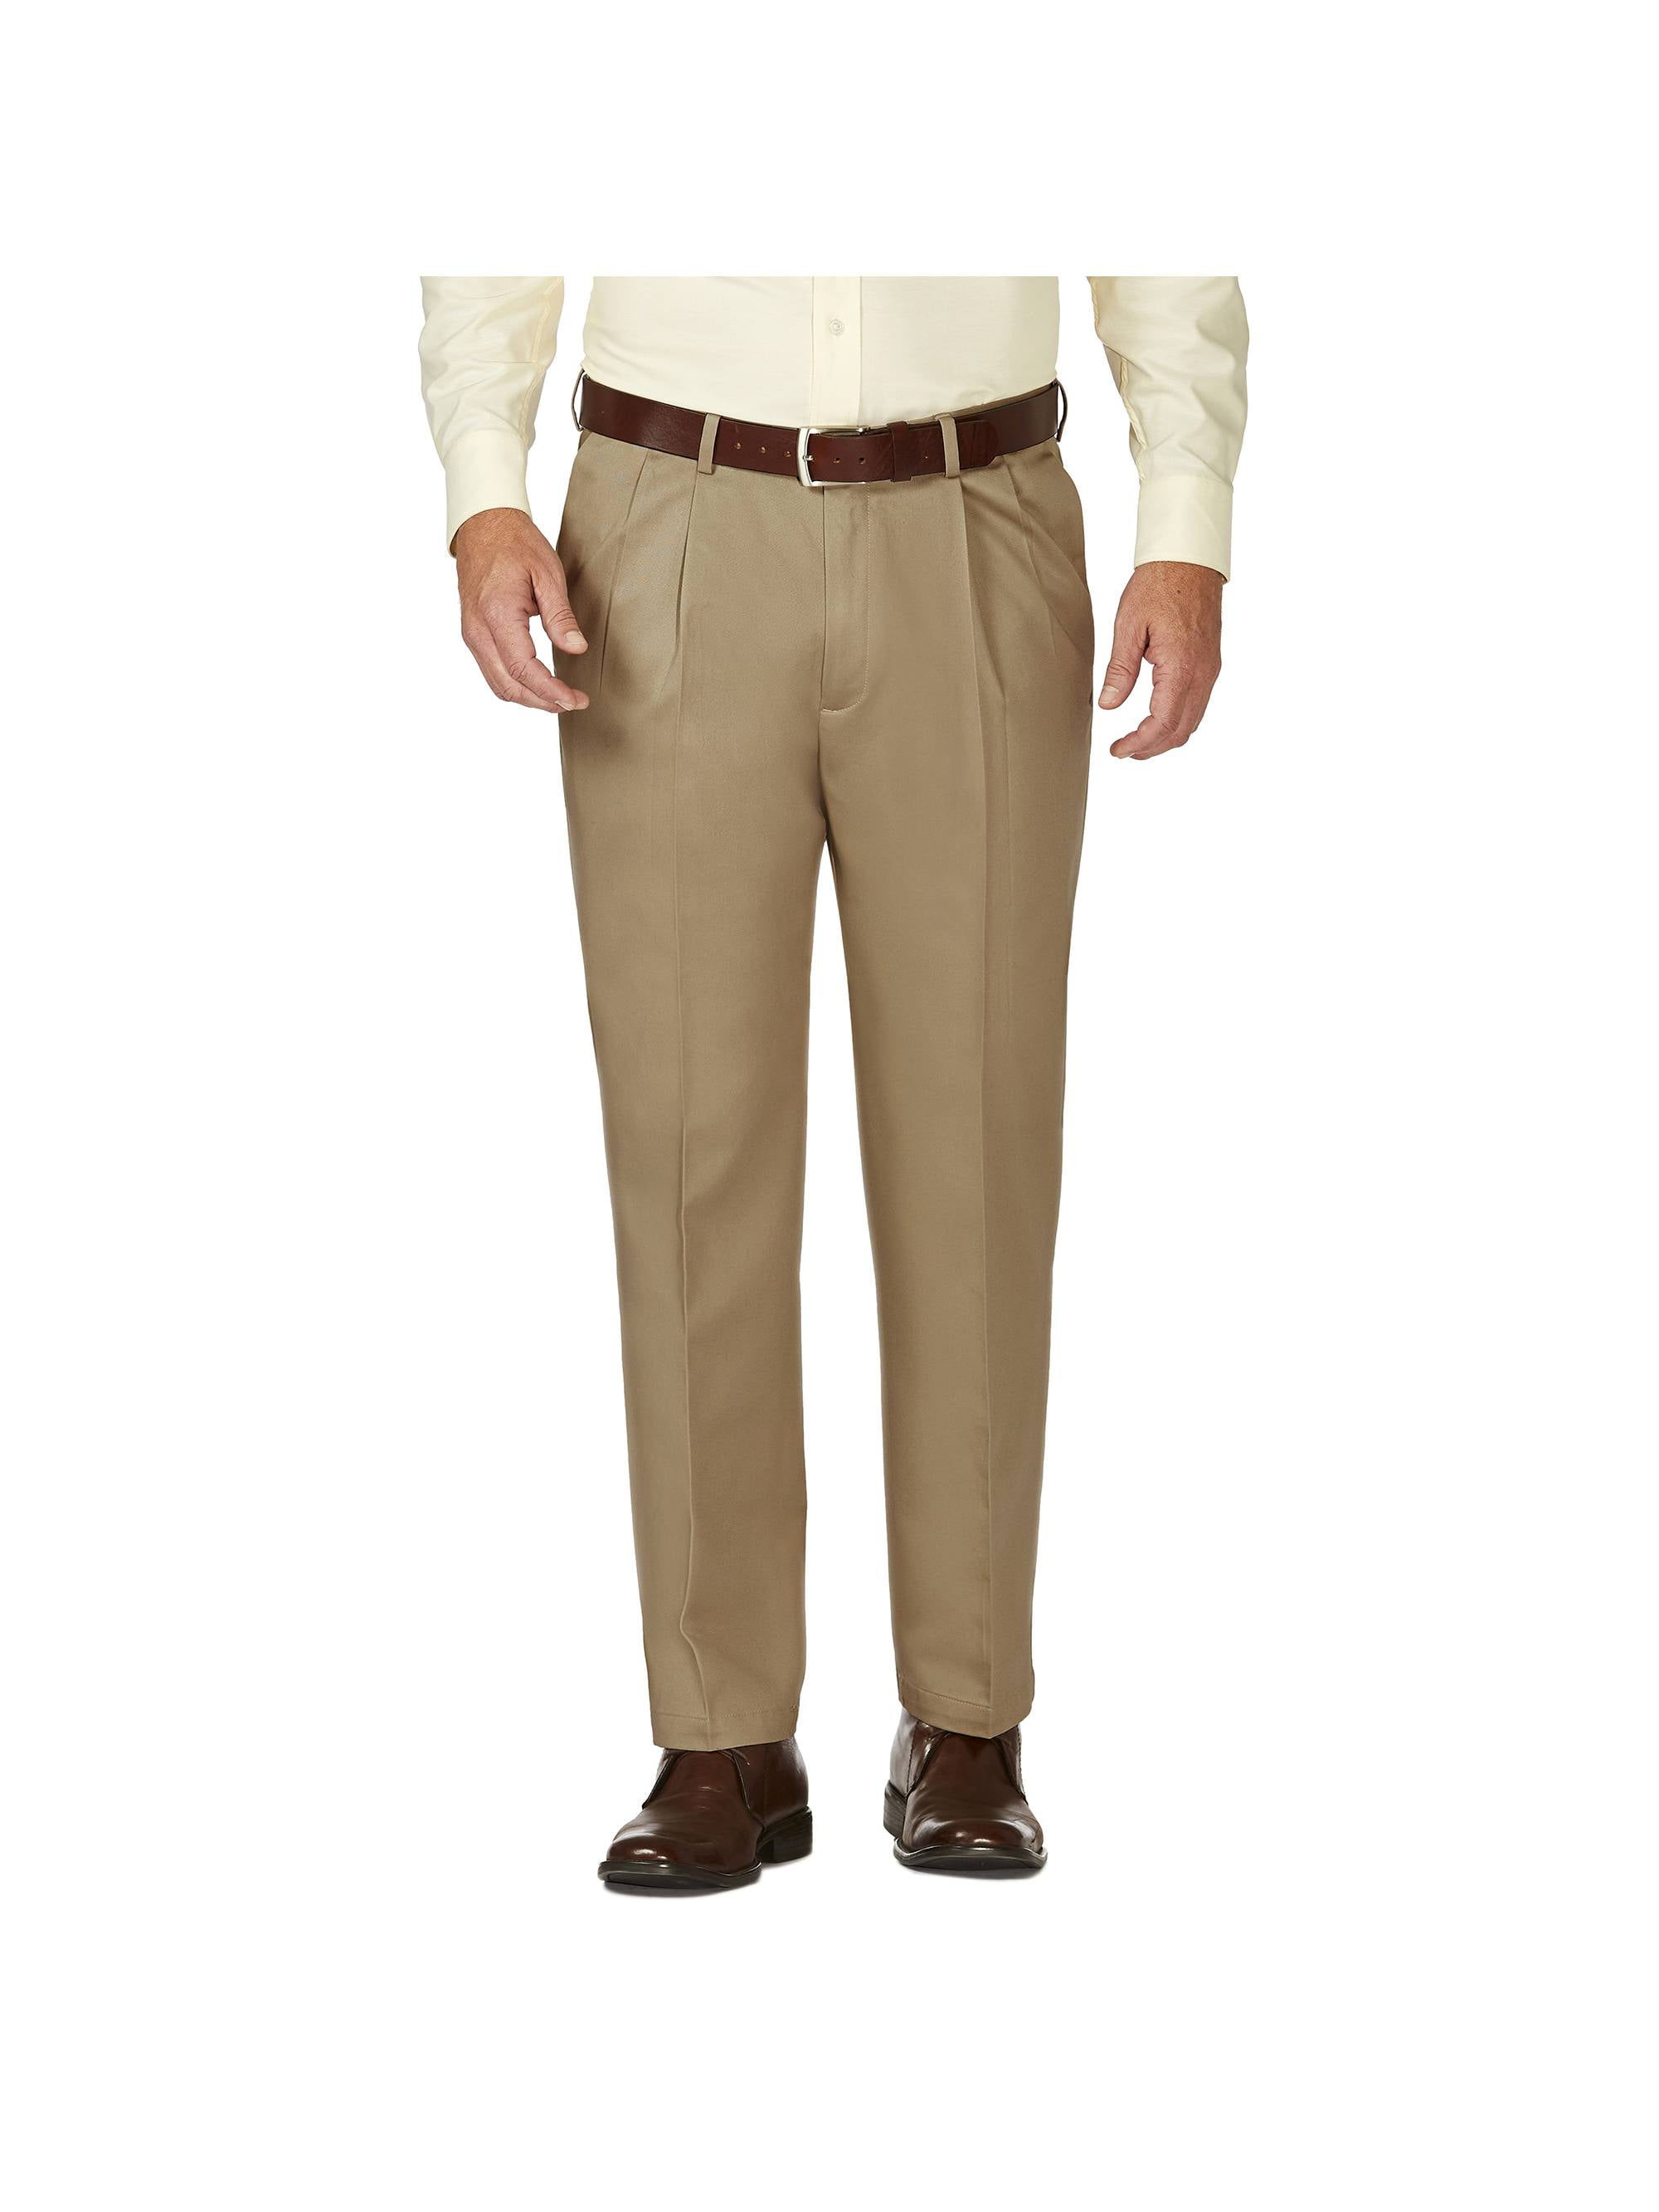 Haggar Men's Work To Weekend® Khaki Pleat Front Pant Classic Fit